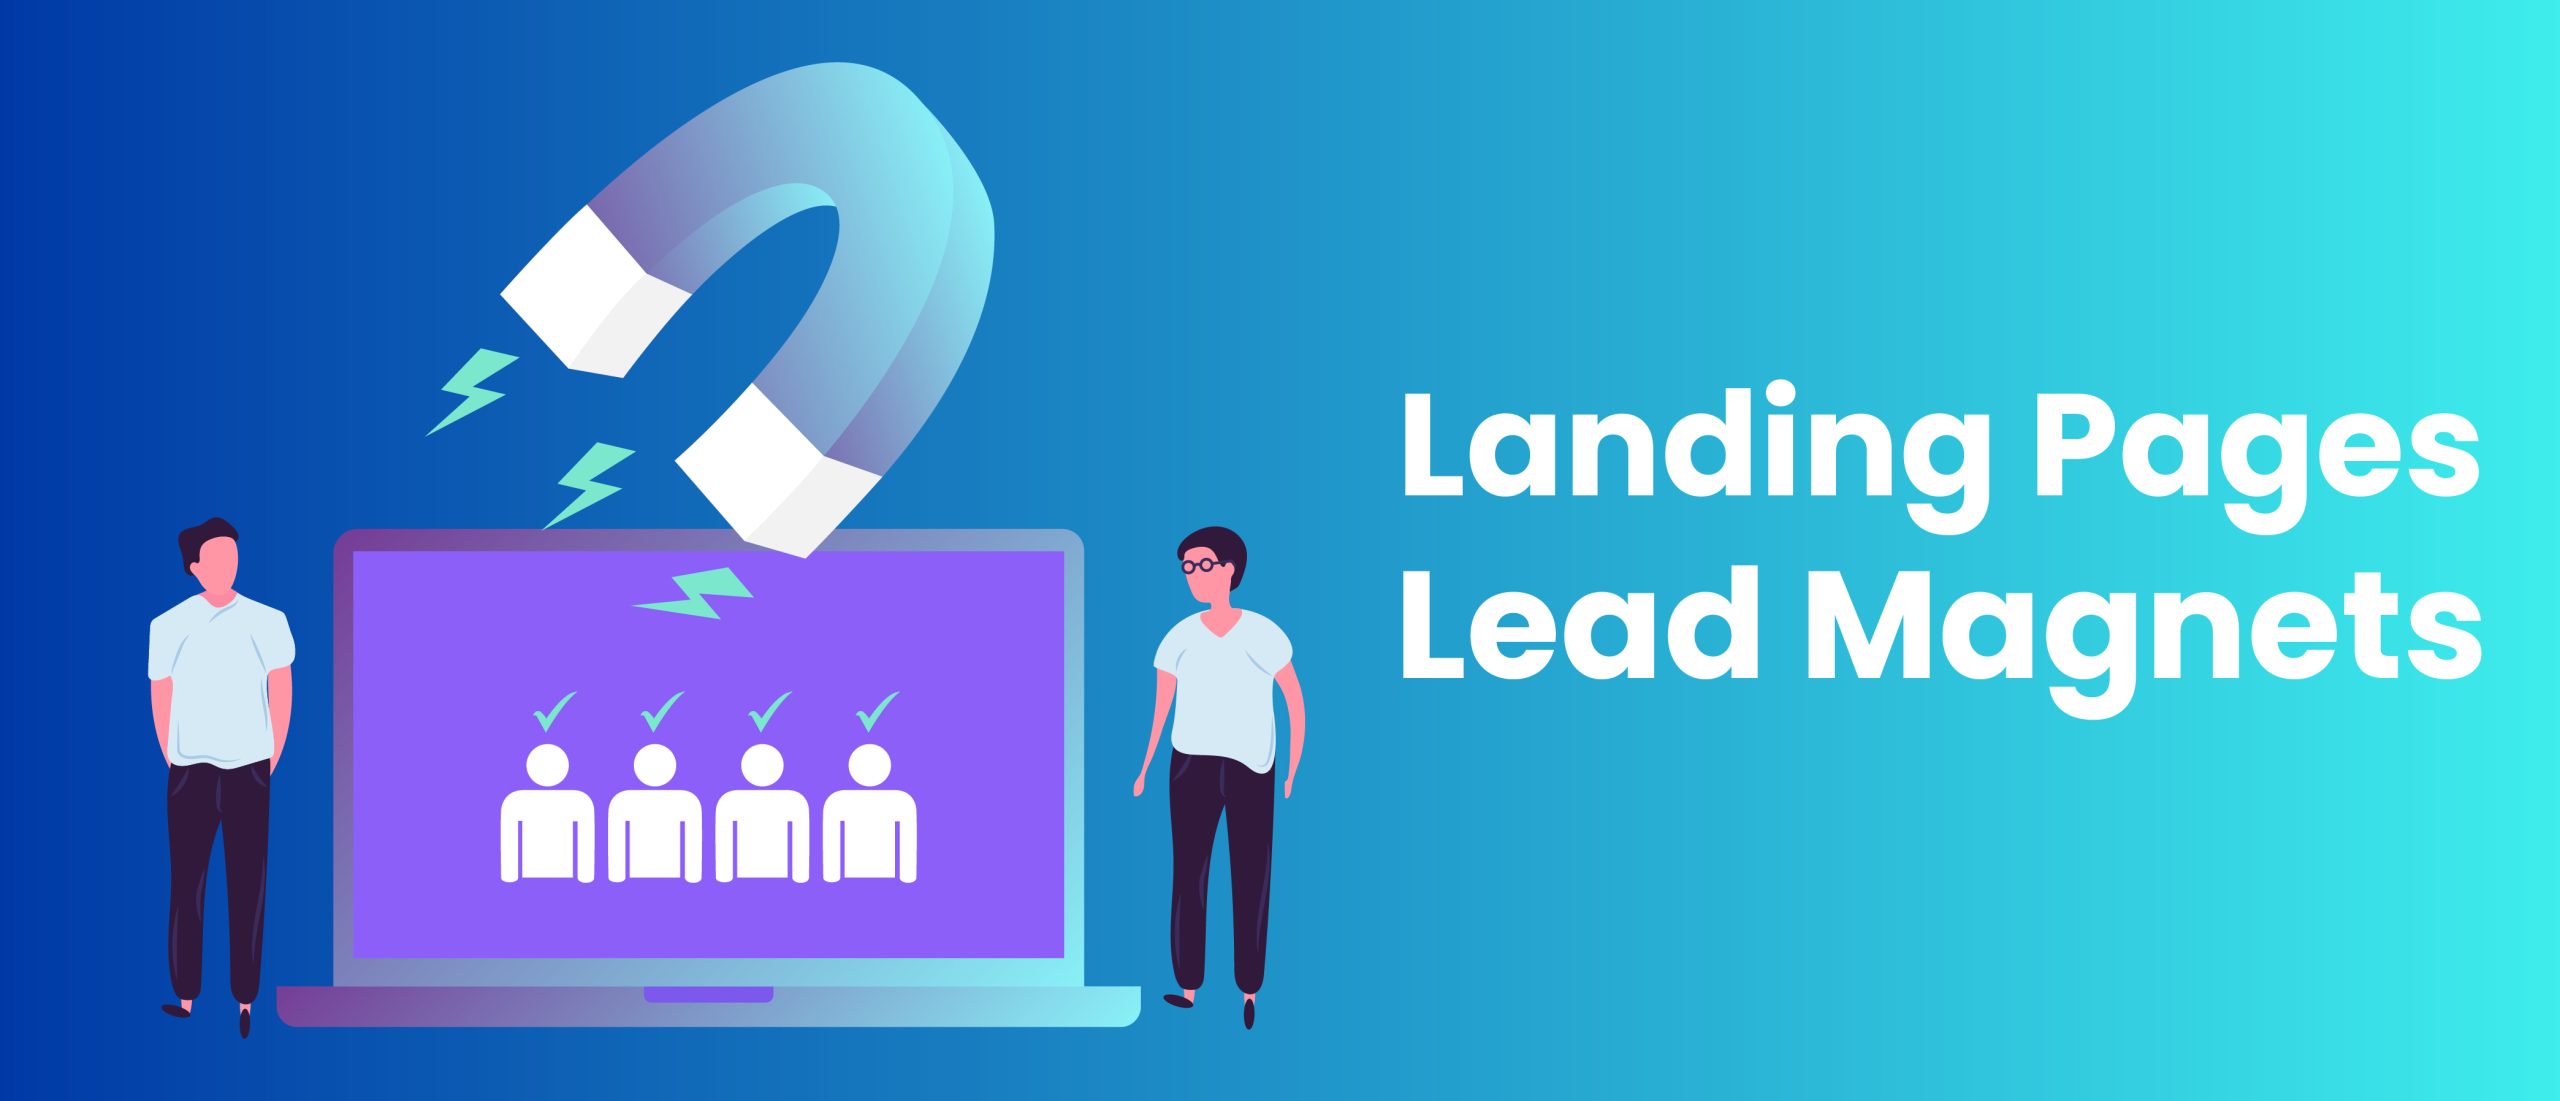 Landing Pages and Lead Magnets